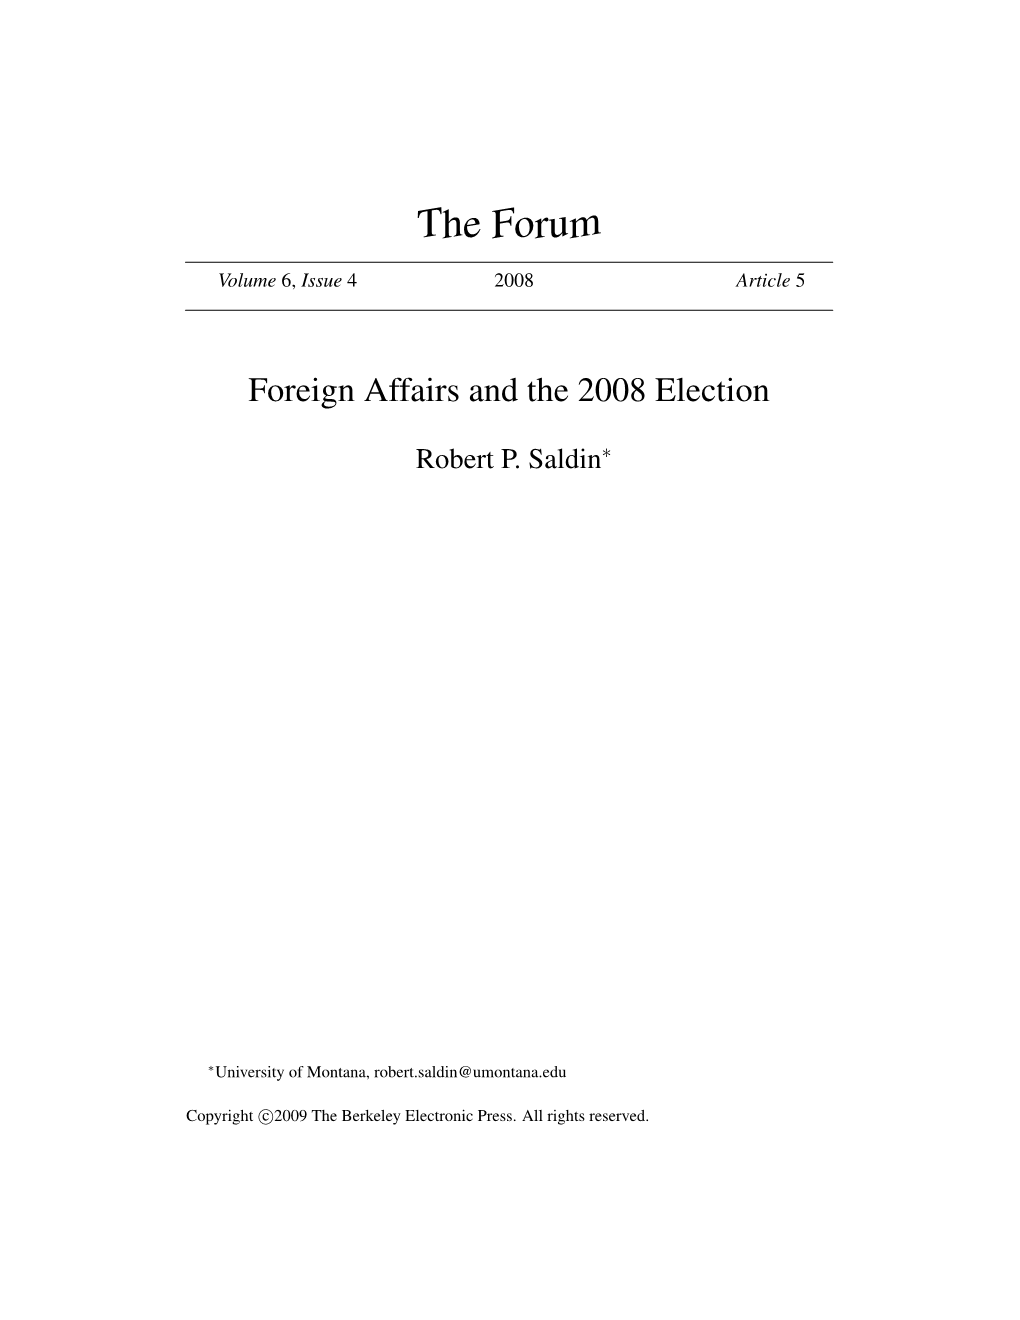 Foreign Affairs and the 2008 Election